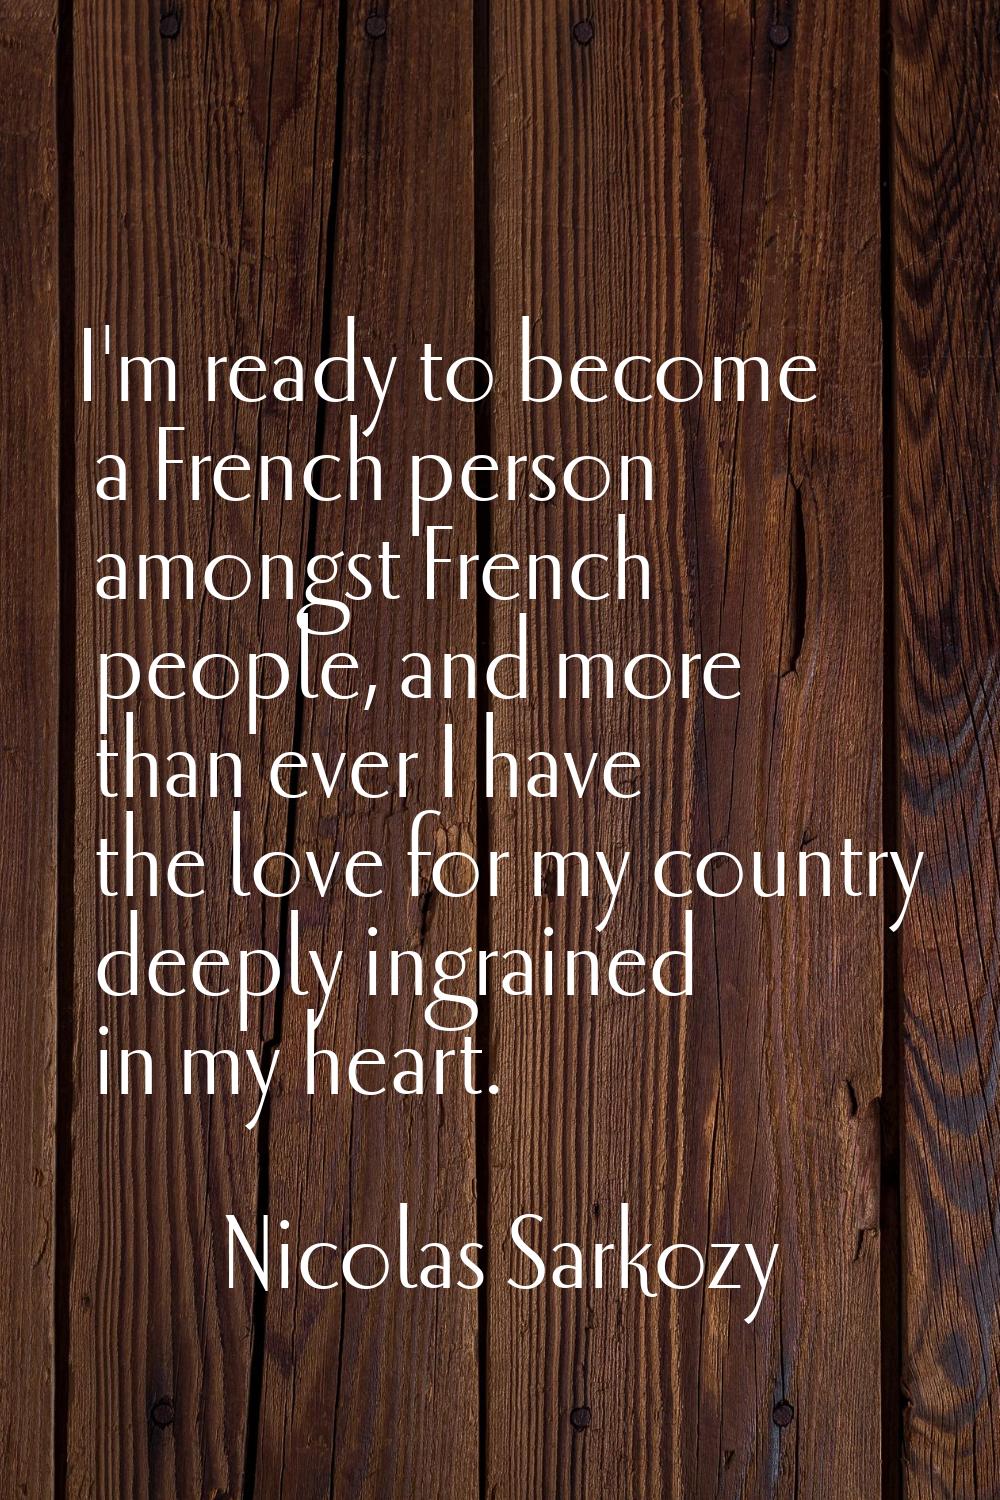 I'm ready to become a French person amongst French people, and more than ever I have the love for m